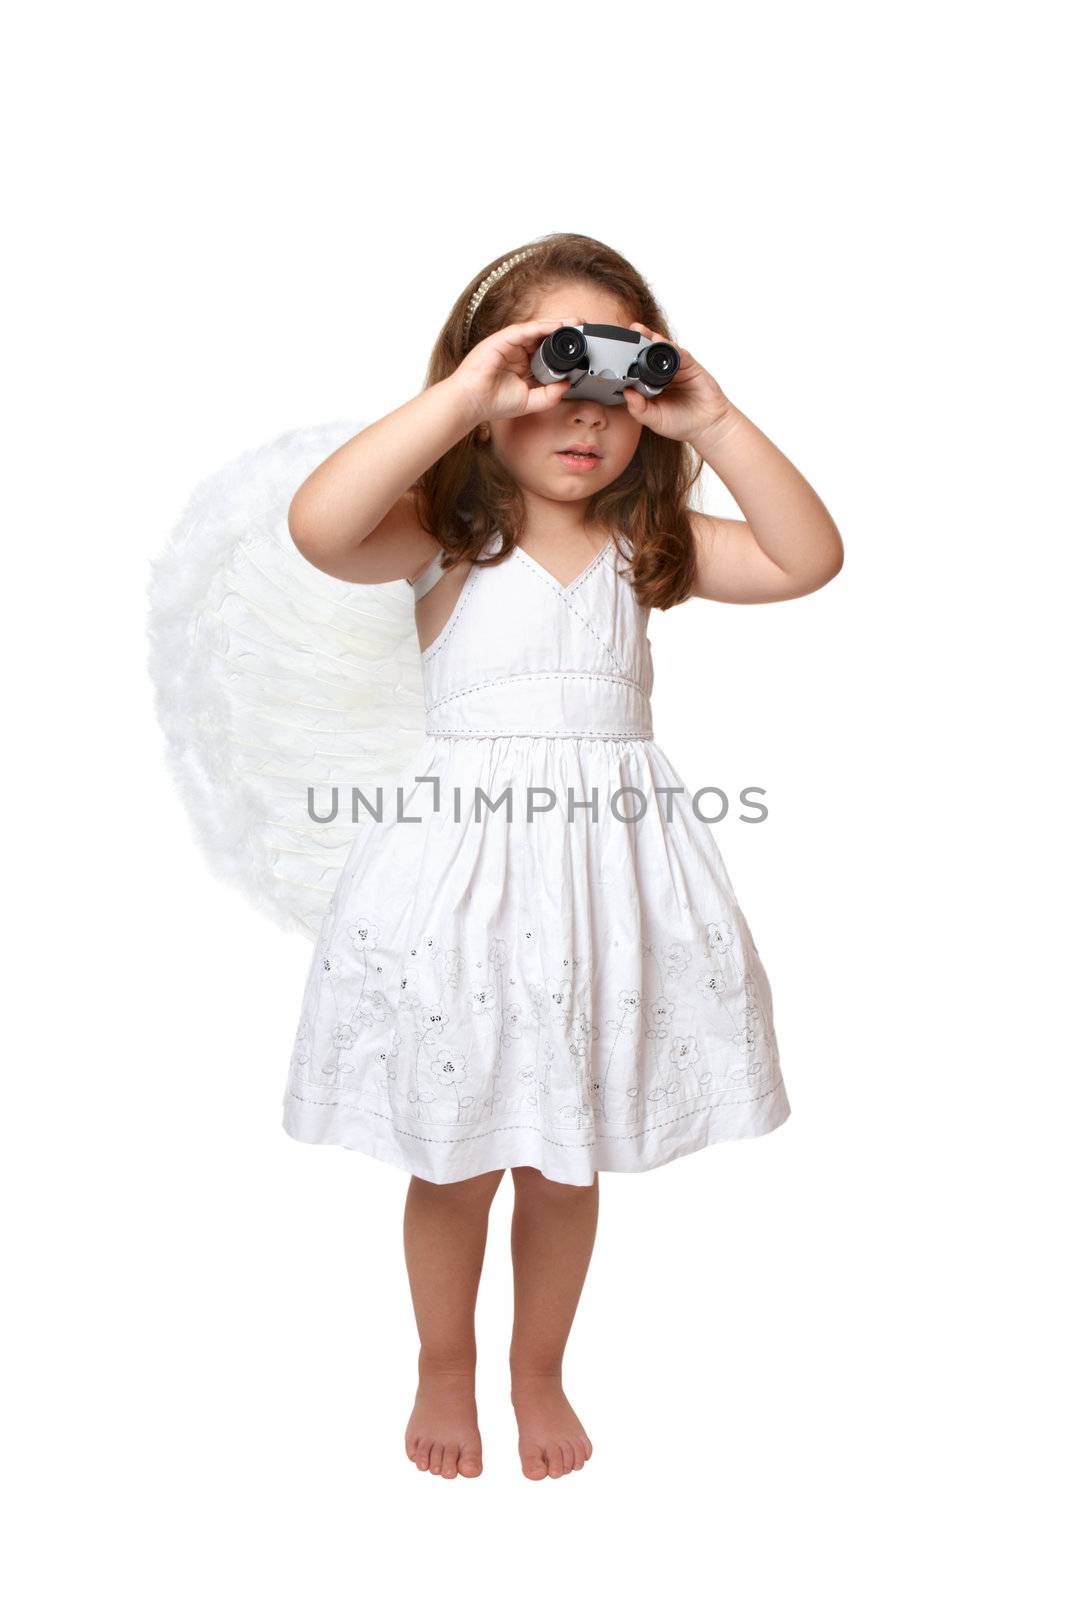 A heavenly angel girl in white dress and feathered wings using binoculars to look, keep watch or see something